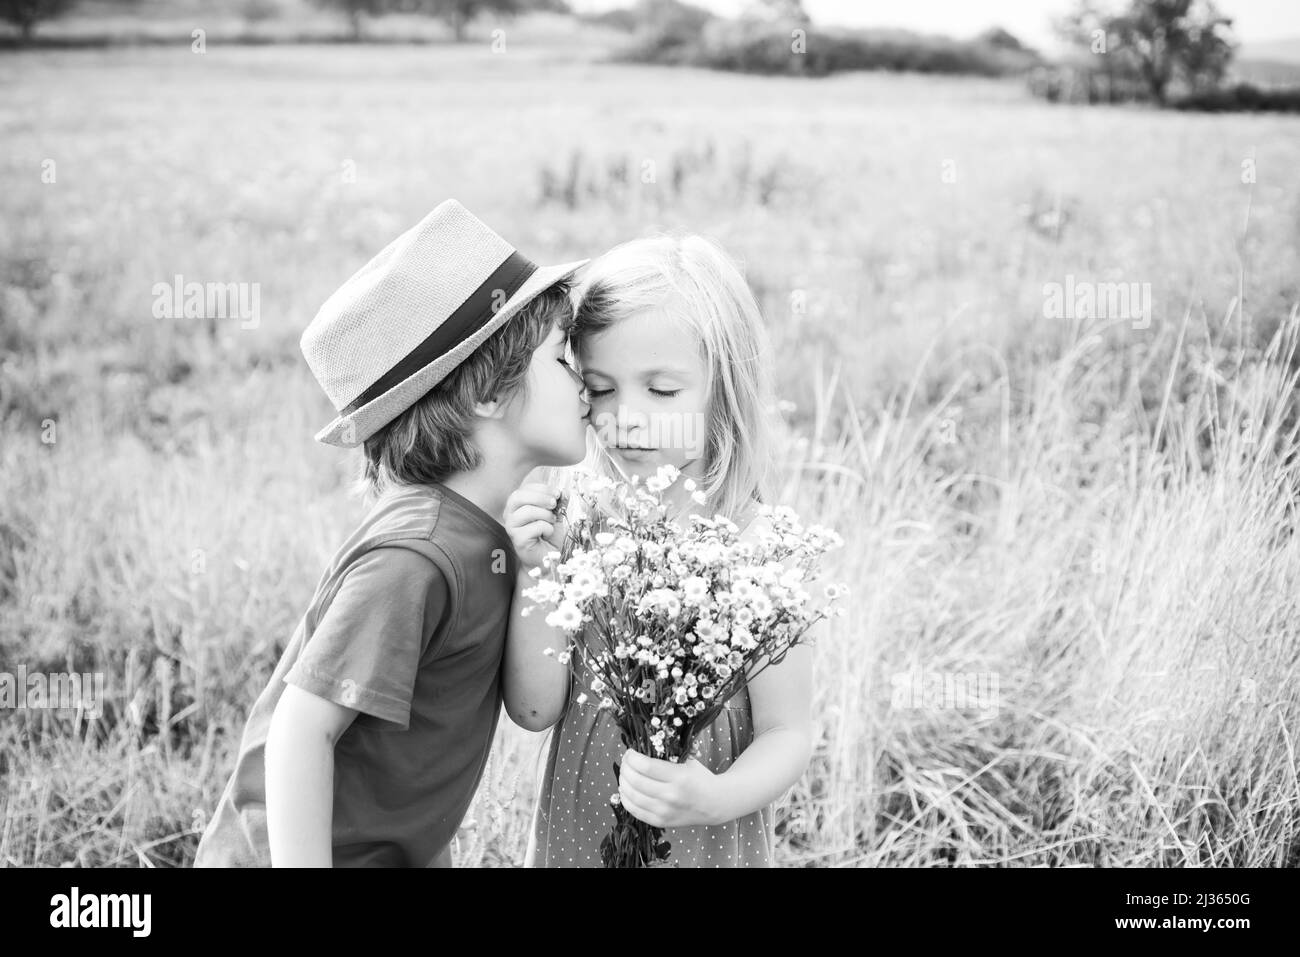 Love. Valentines day. Festive Art Greeting Card. Childhood on countryside. Lovely children. Human emotions - kids first love. Cute little children Stock Photo